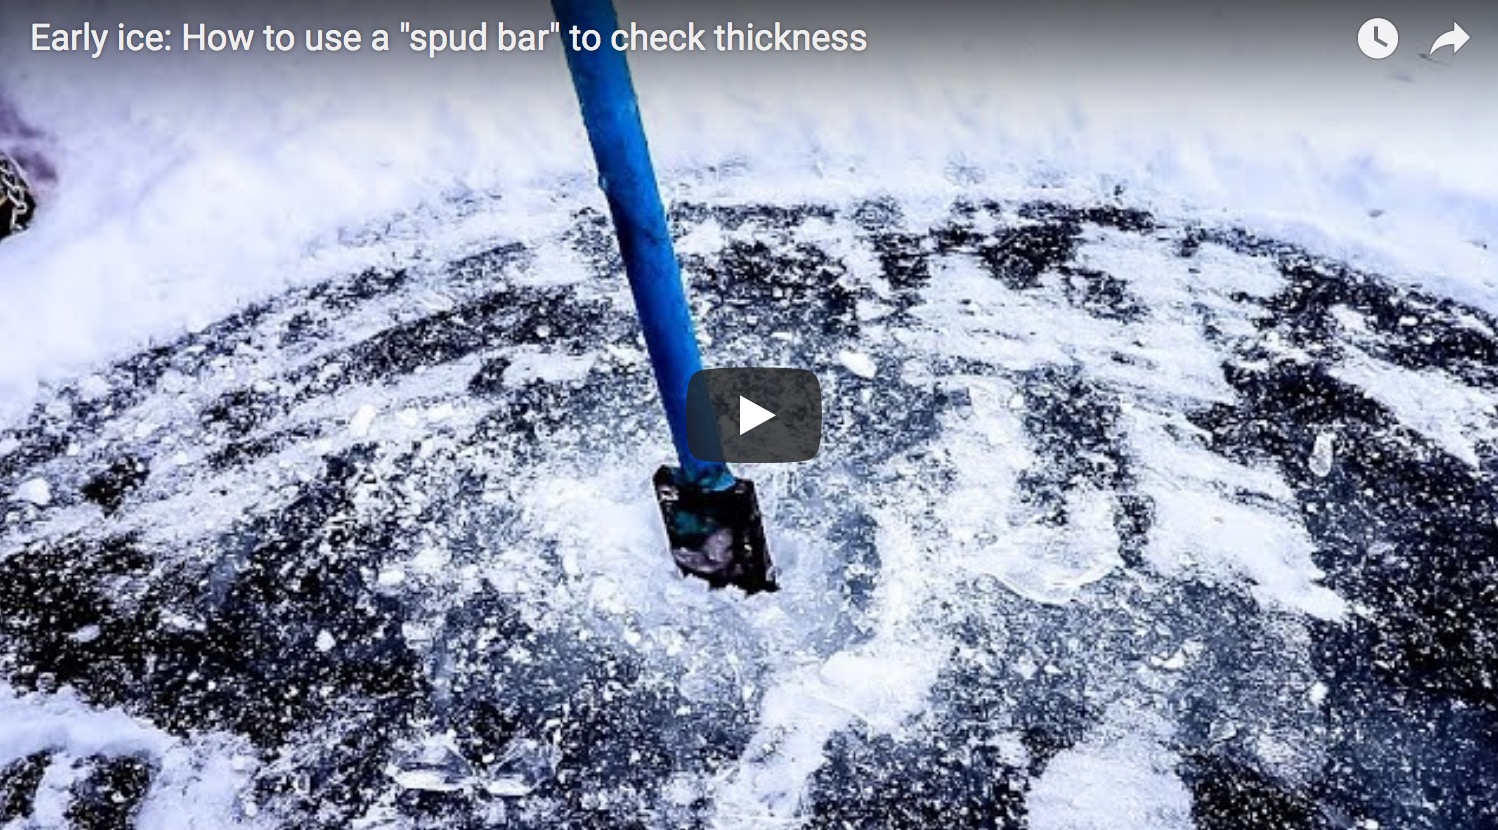 Early-ice safety: How to use a “spud bar” to check ice thickness – Target  Walleye